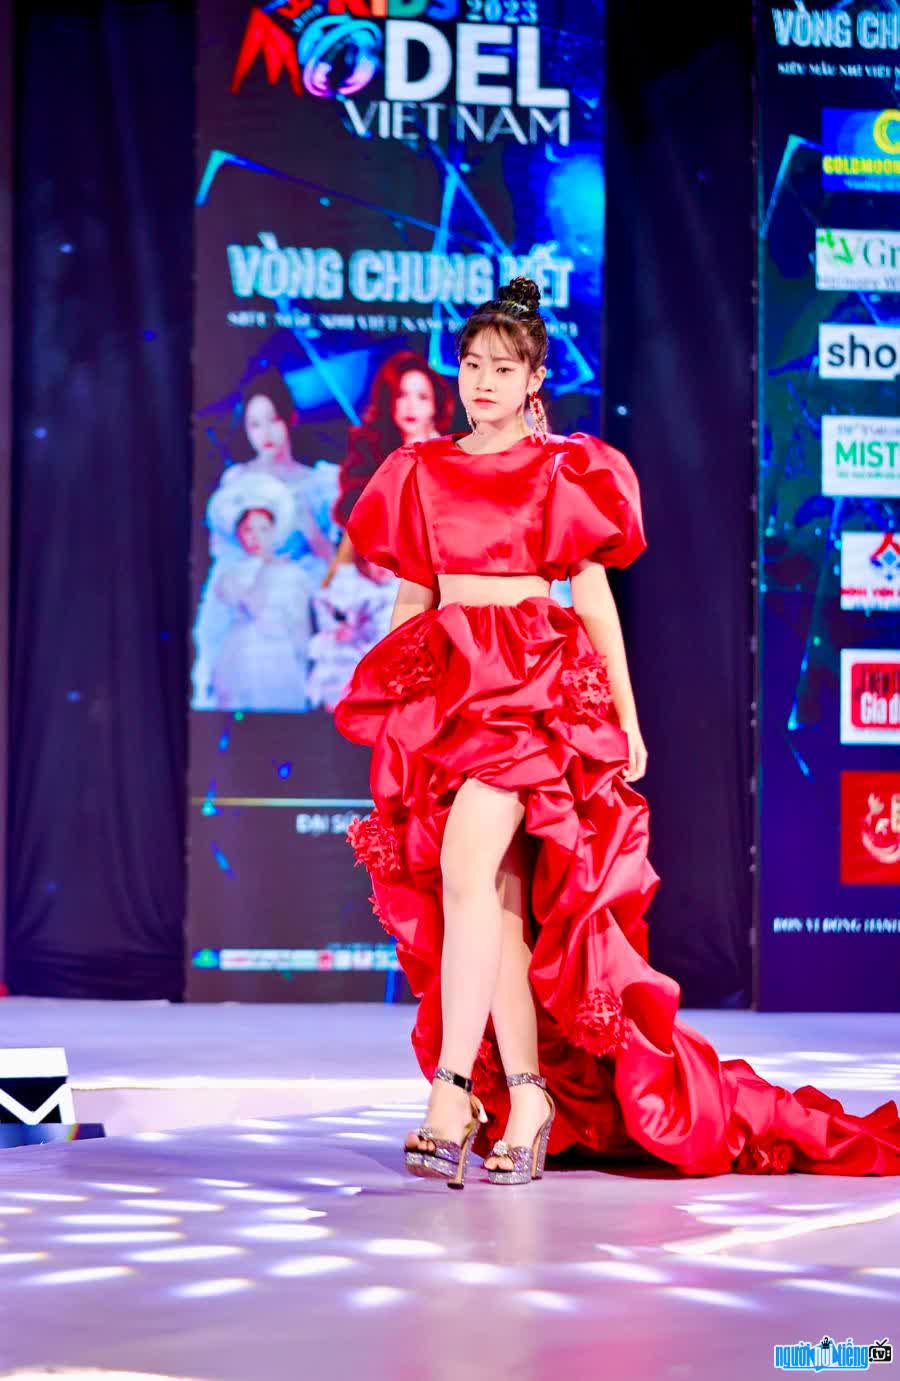 Thuy Tien performed confidently on the show. stage